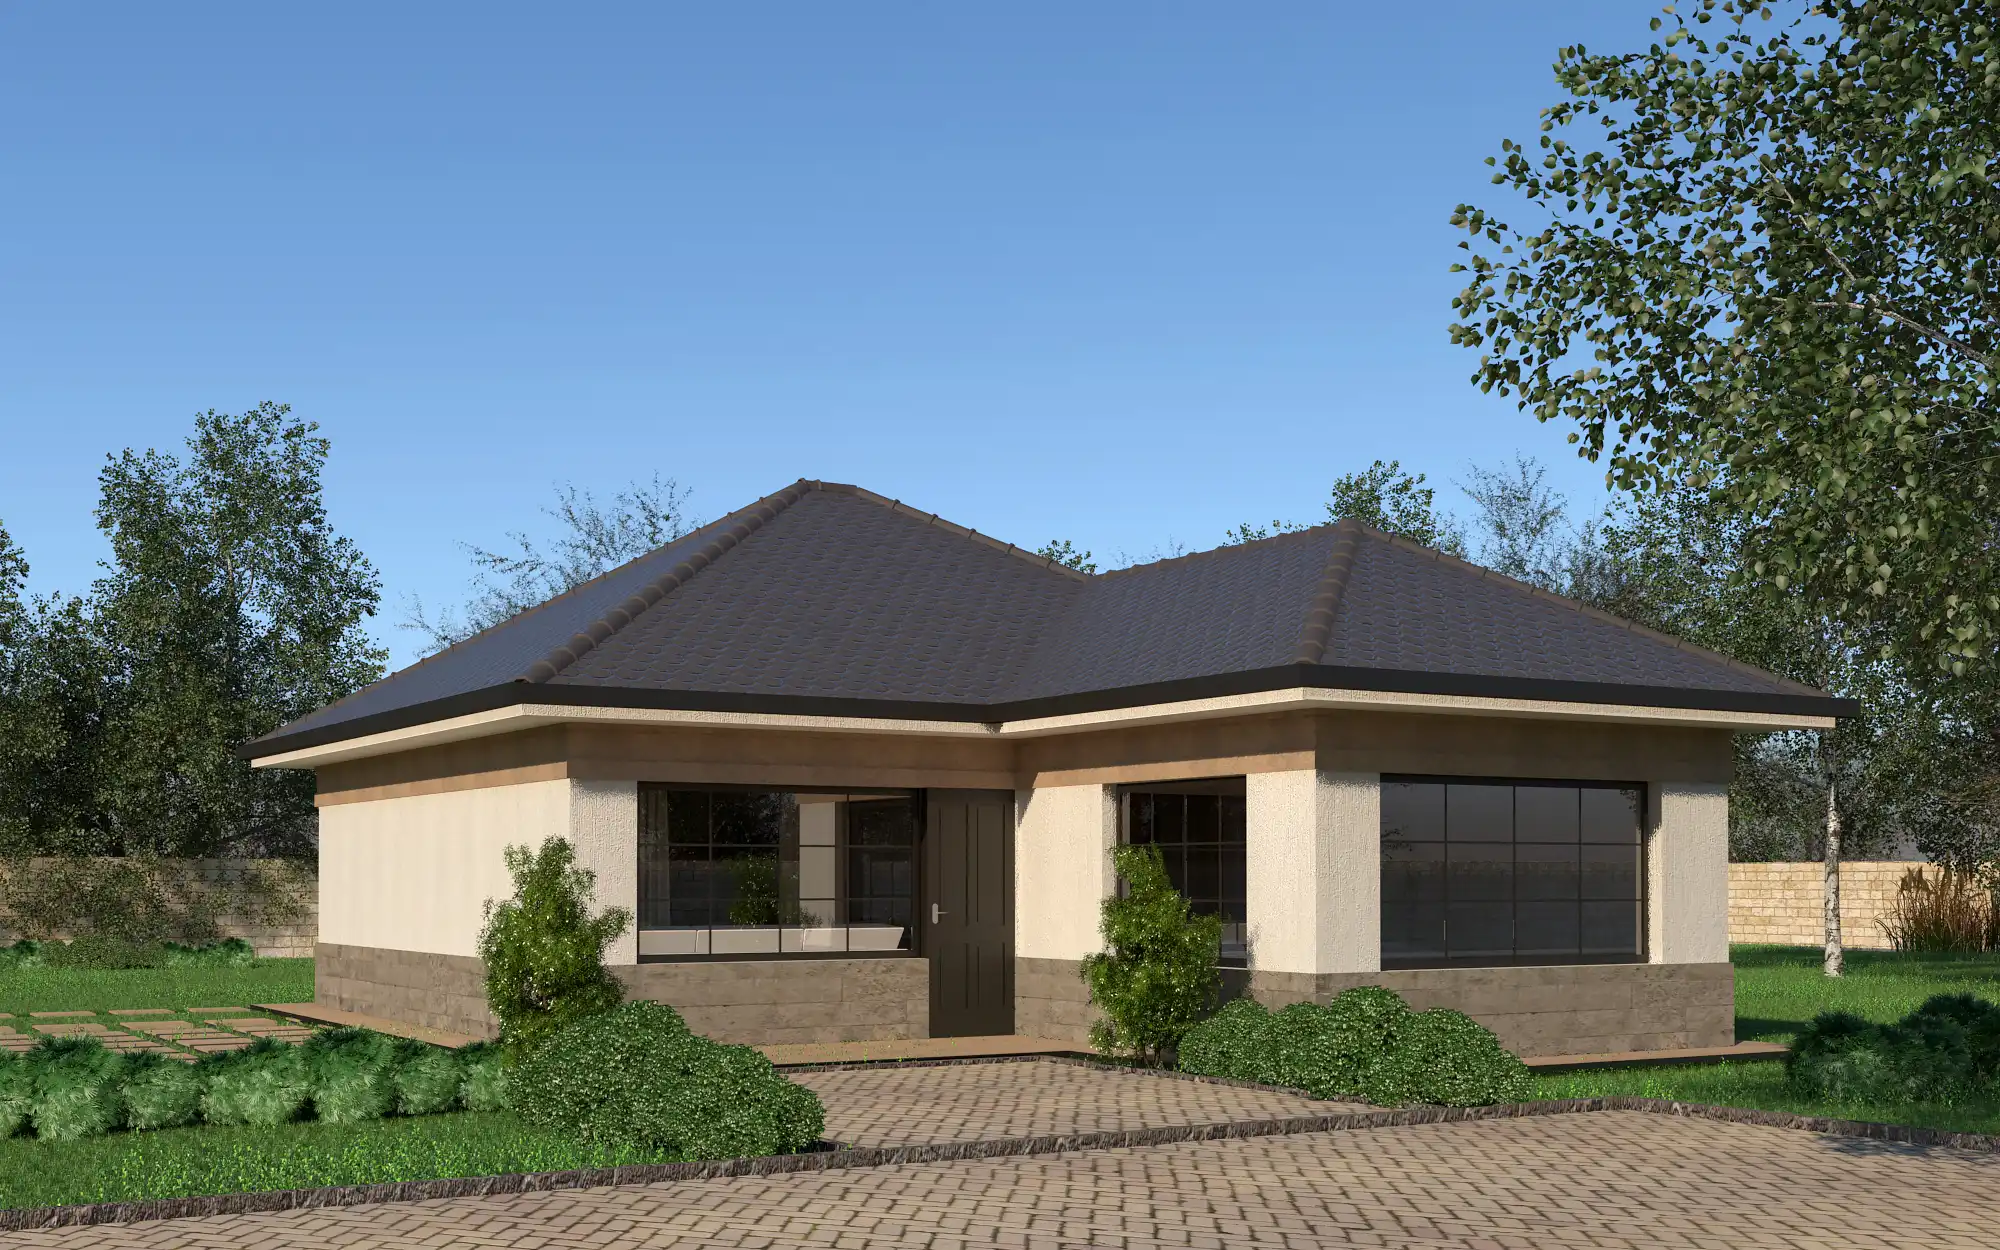 3 Bedroom Bungalow - ID 3191 - 3191_Phase3_Front.jpg from Inuua Tujenge house plans with 3 bedrooms and 2 bathrooms. ( jengapolepole )